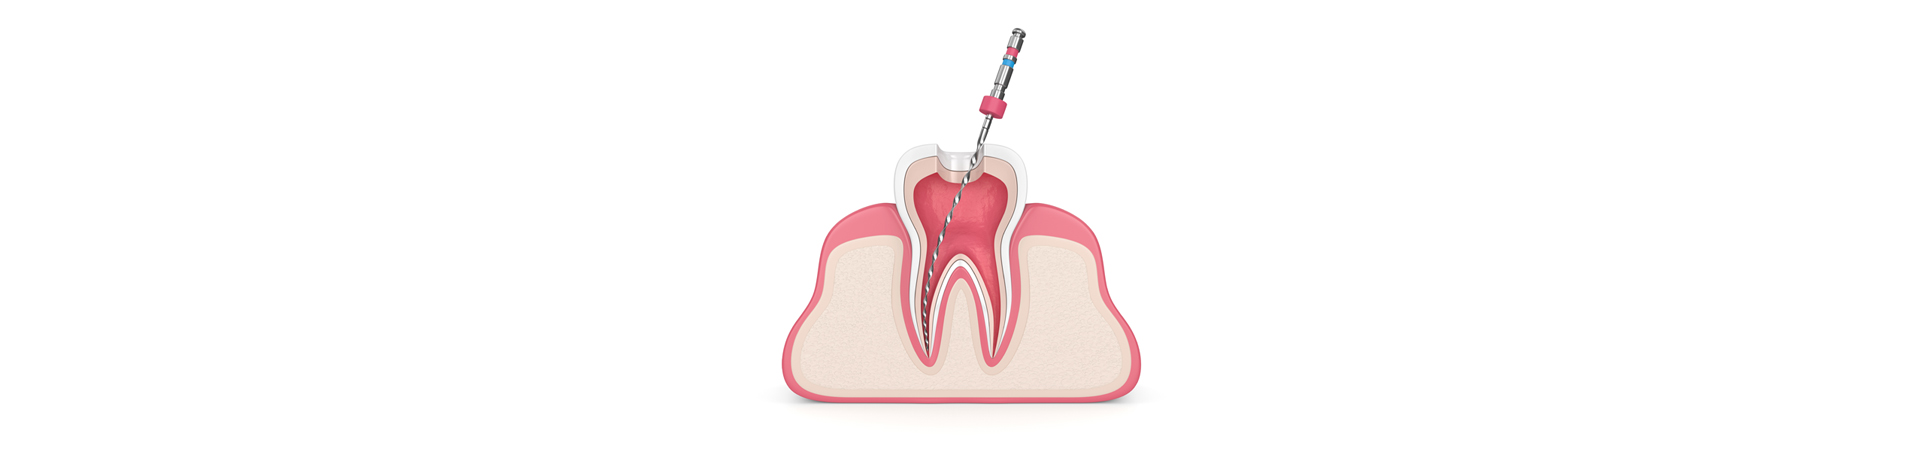 Root Canal Therapy Explanation